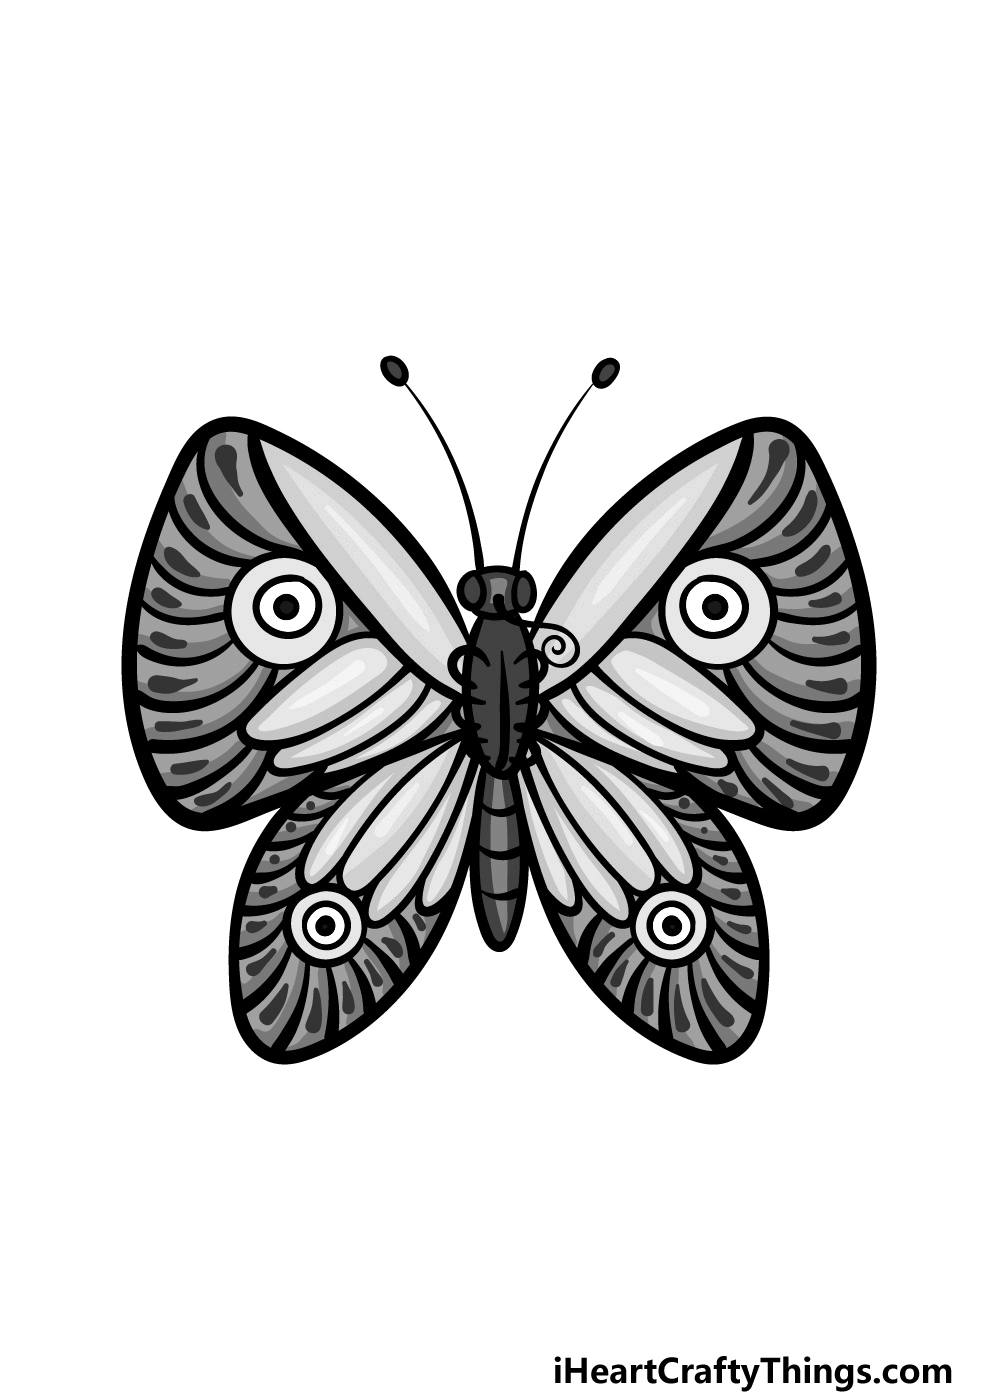 Sketch Butterfly Drawing - How To Draw A Sketch Butterfly Step By Step